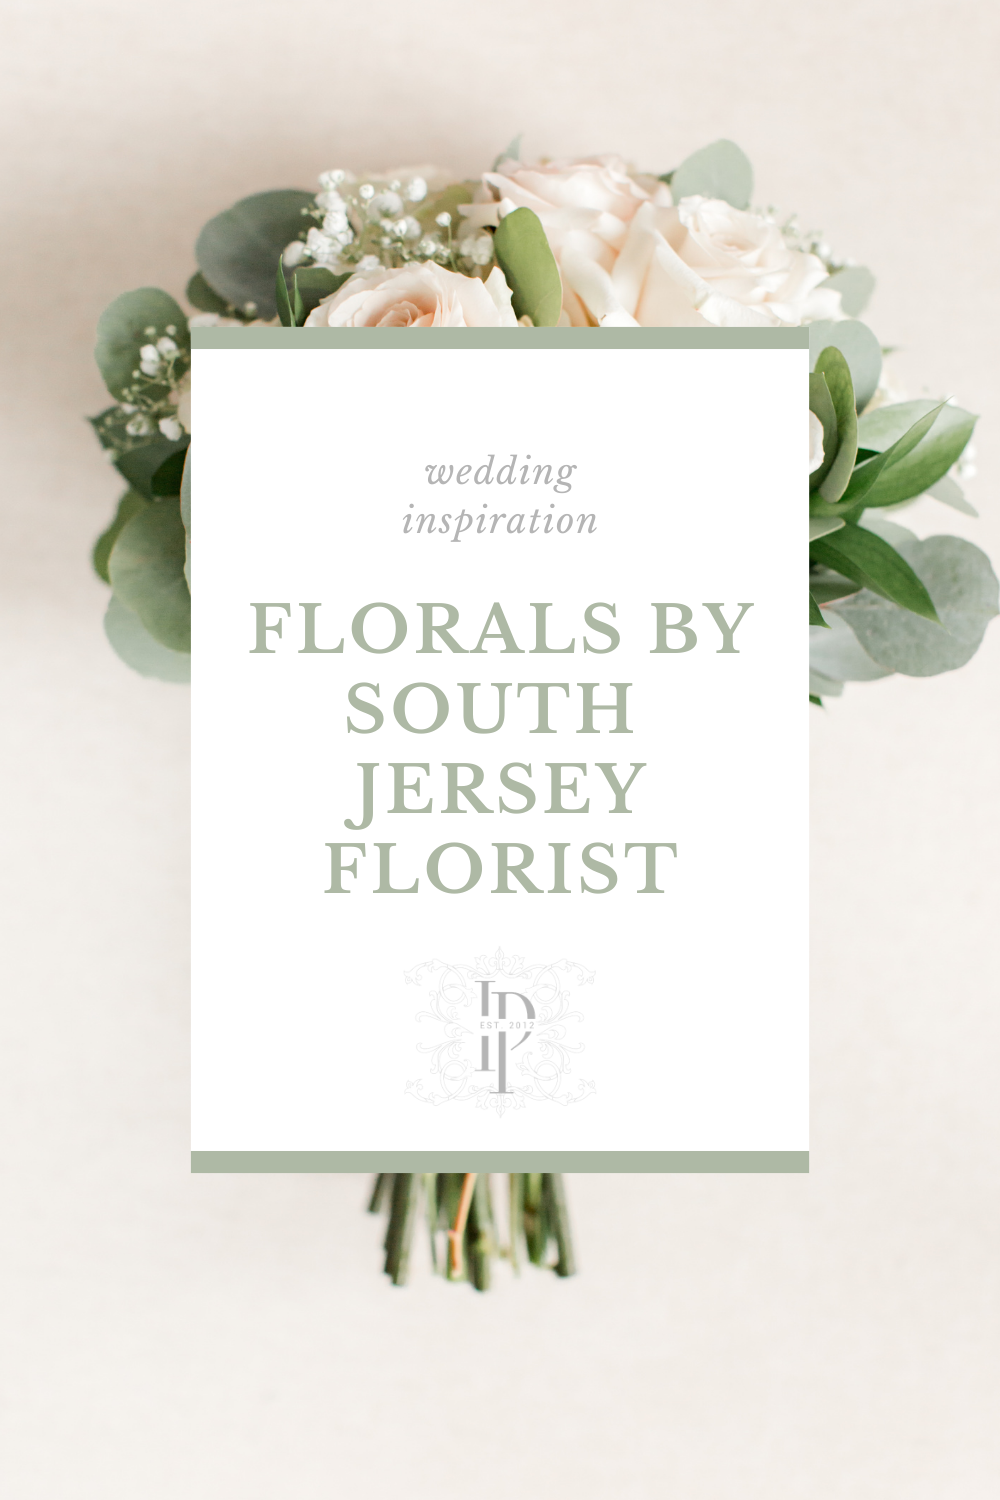 Seaview Hotel wedding photos by Idalia Photography with florals by South Jersey Florist